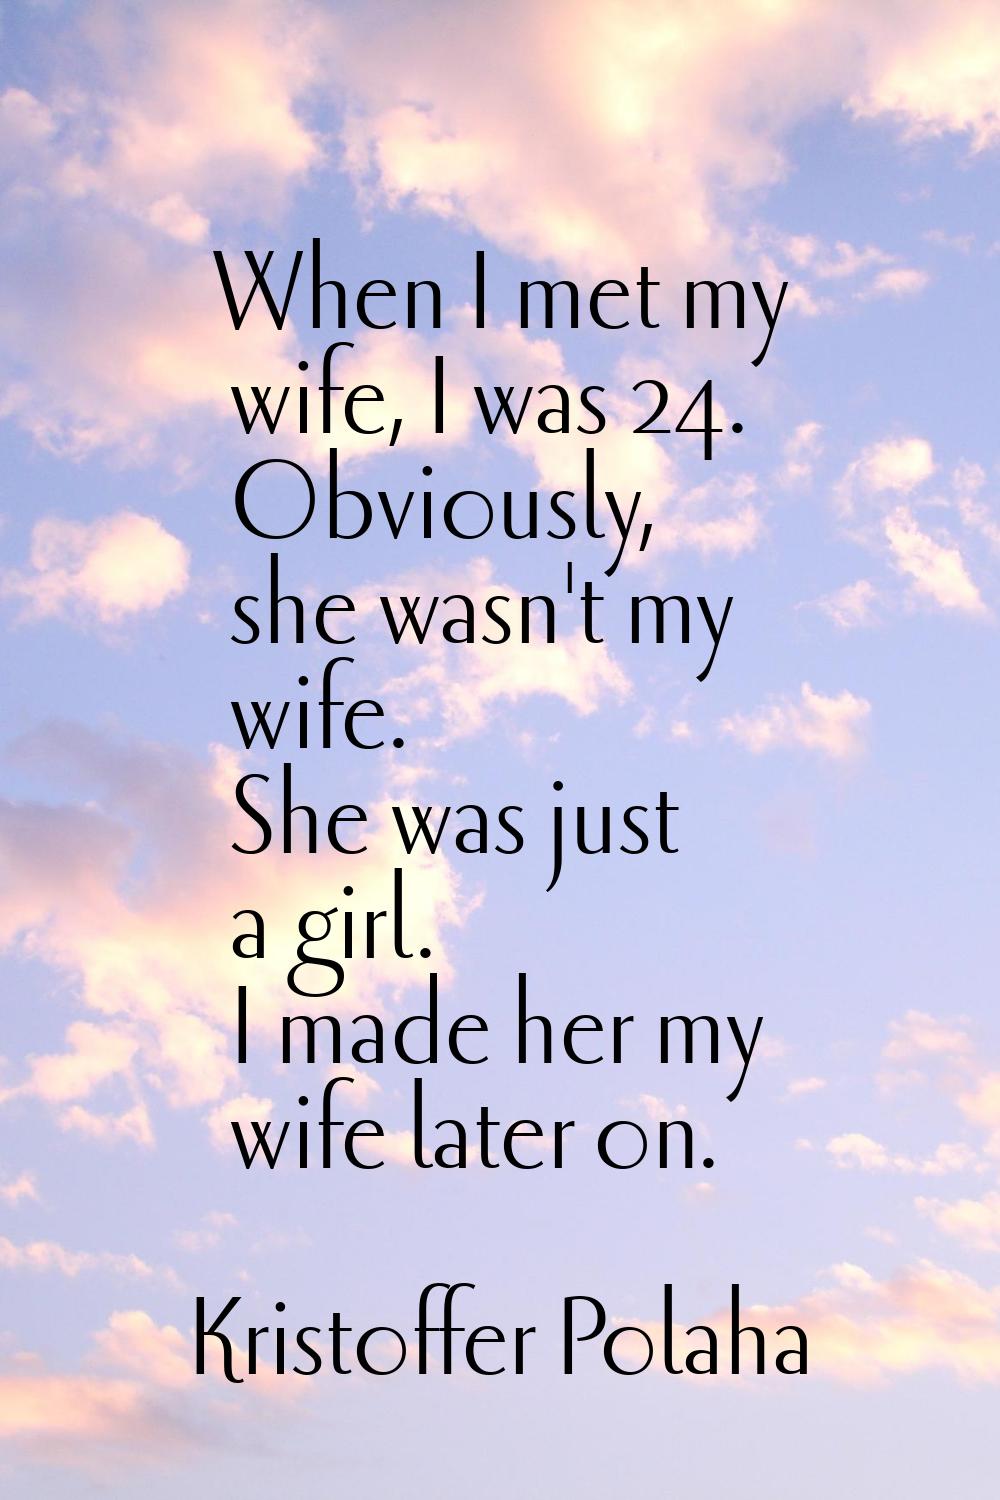 When I met my wife, I was 24. Obviously, she wasn't my wife. She was just a girl. I made her my wif